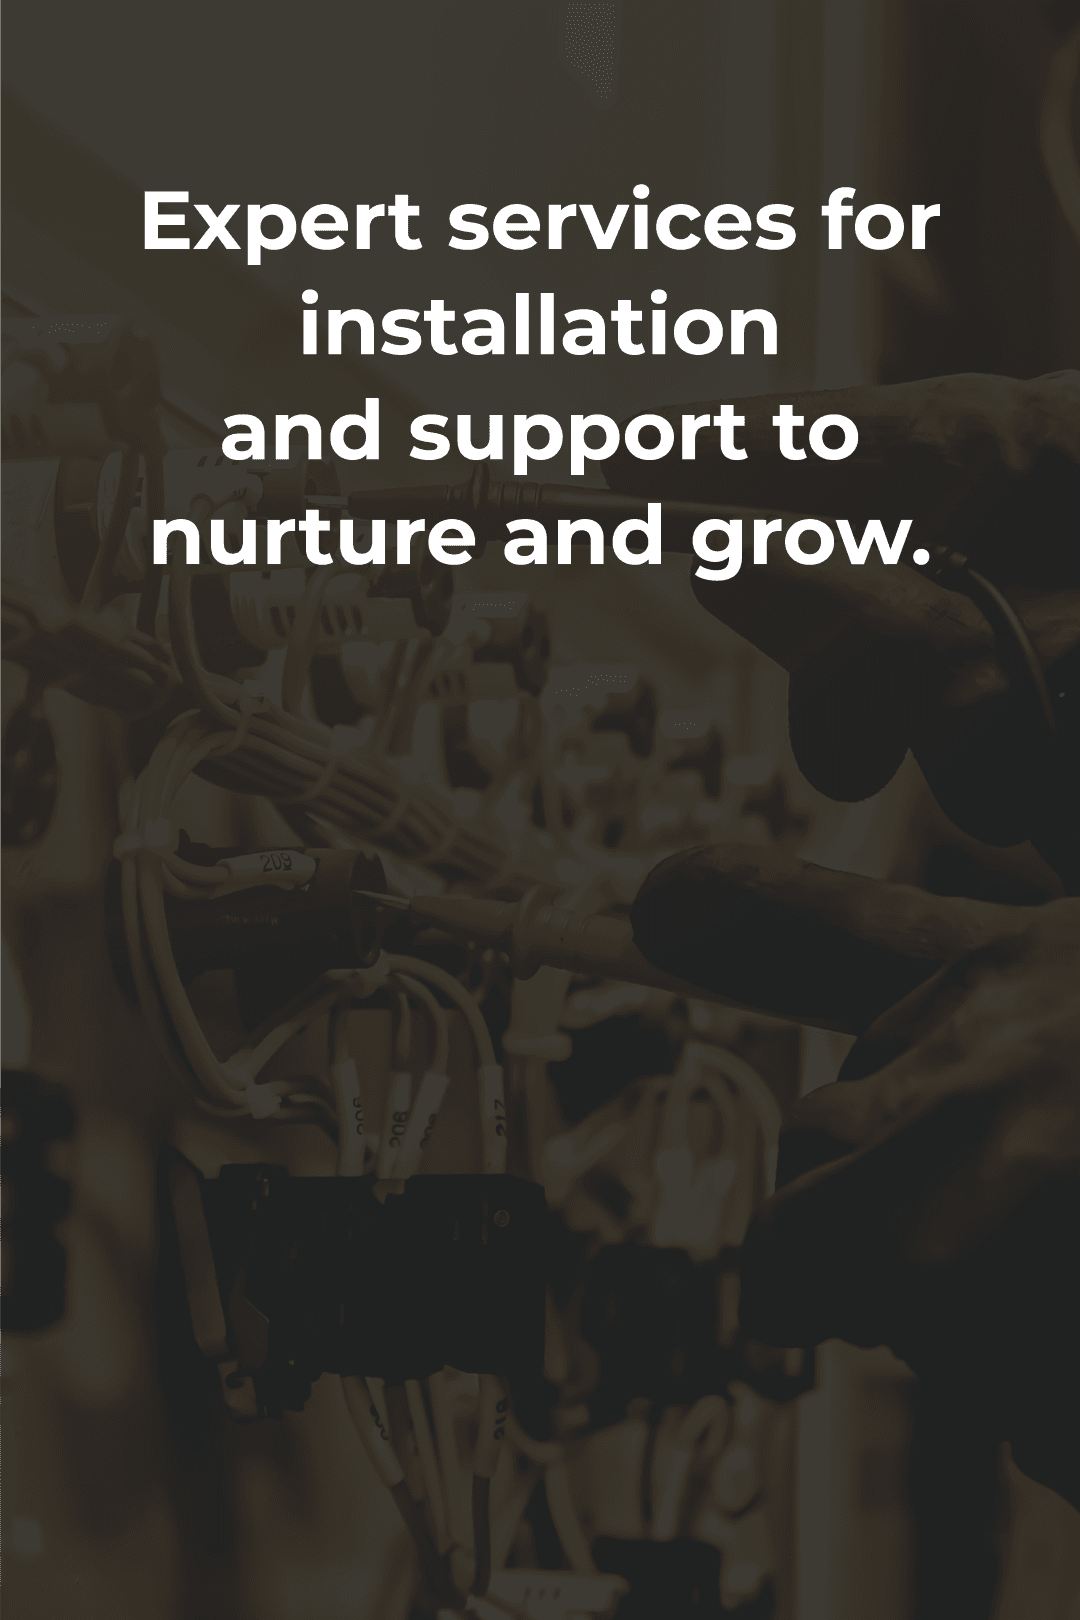 Expert services for installation and support to nurture and grow.